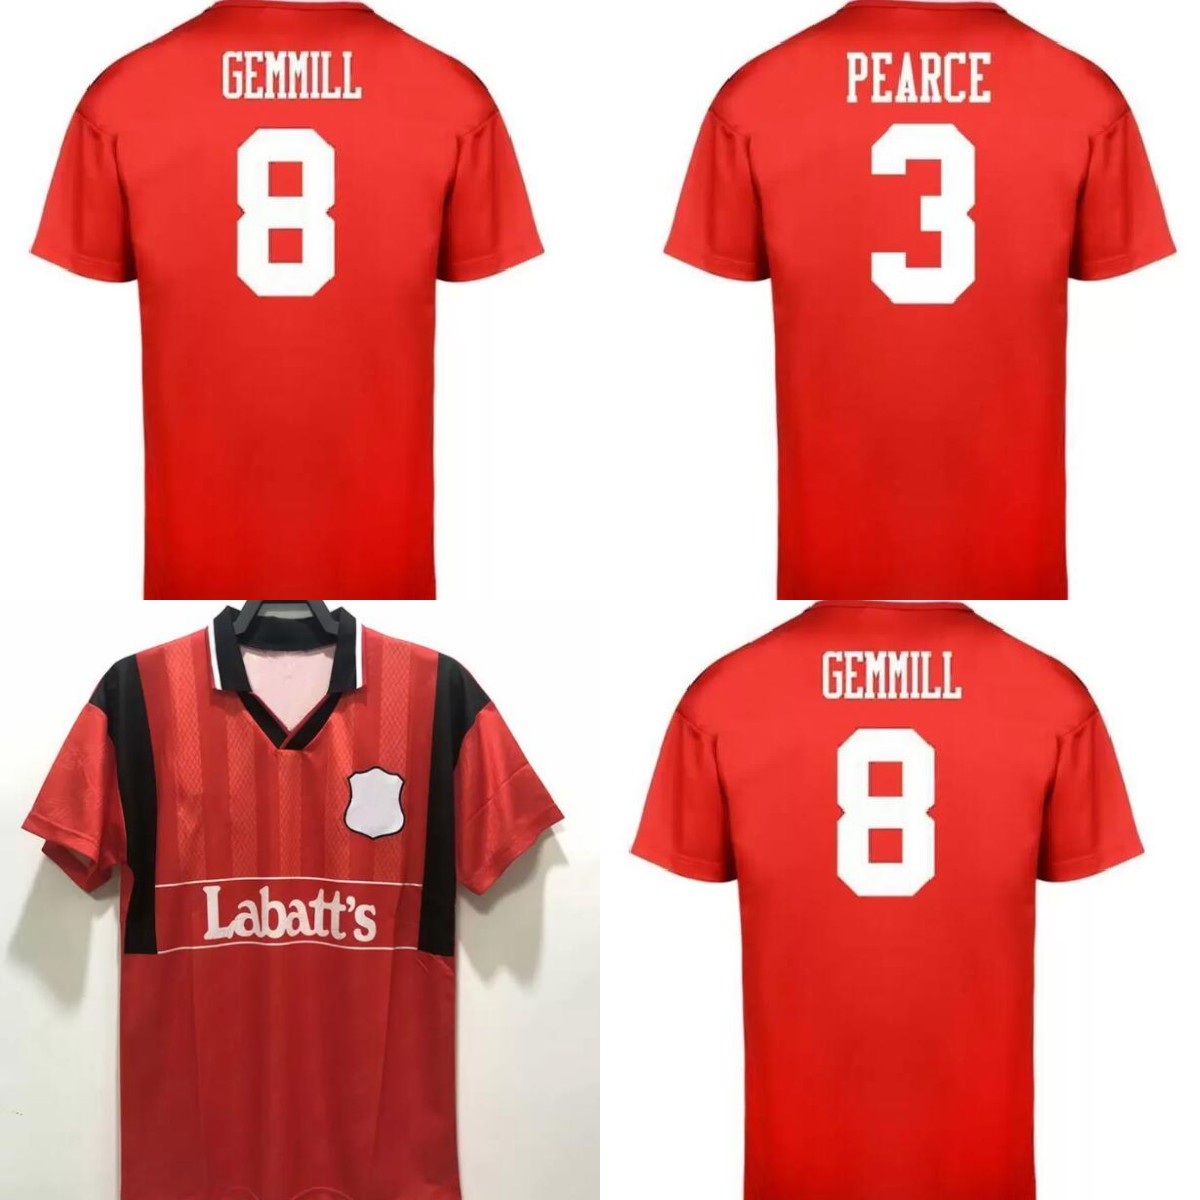 

1979 94-95 COLLYMORE PEARCE Mens Retro Soccer Jerseys GRABBAN LOLLEY MCKENNA GEMMILL LEE Home Football Shirt, Red